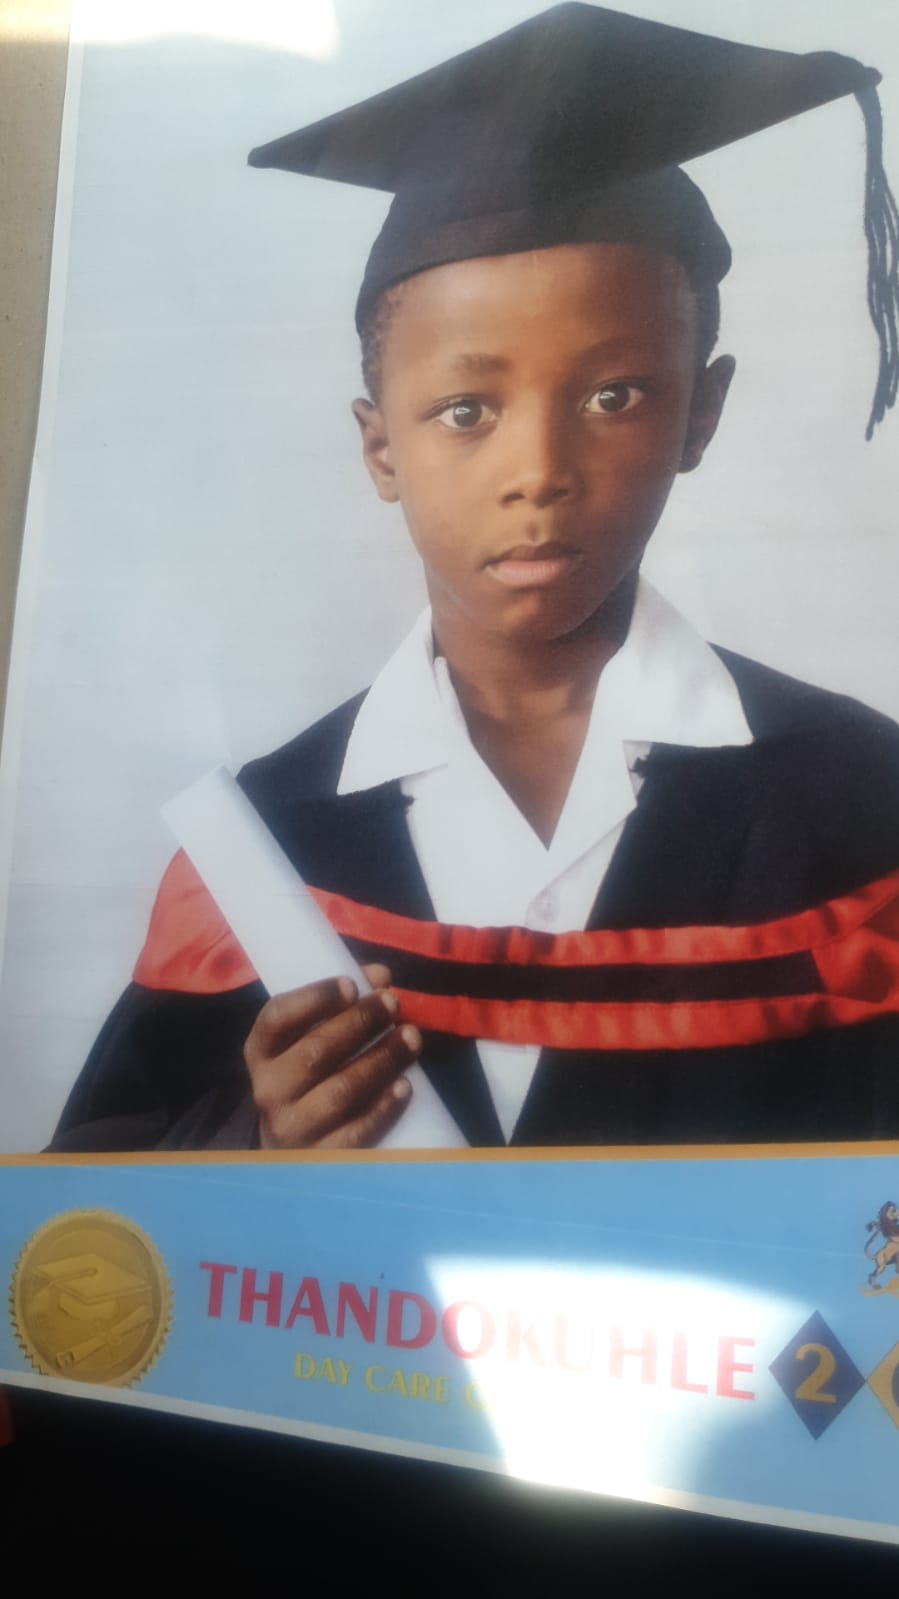 Alexandra boy runs from home after beating. He is now missing   